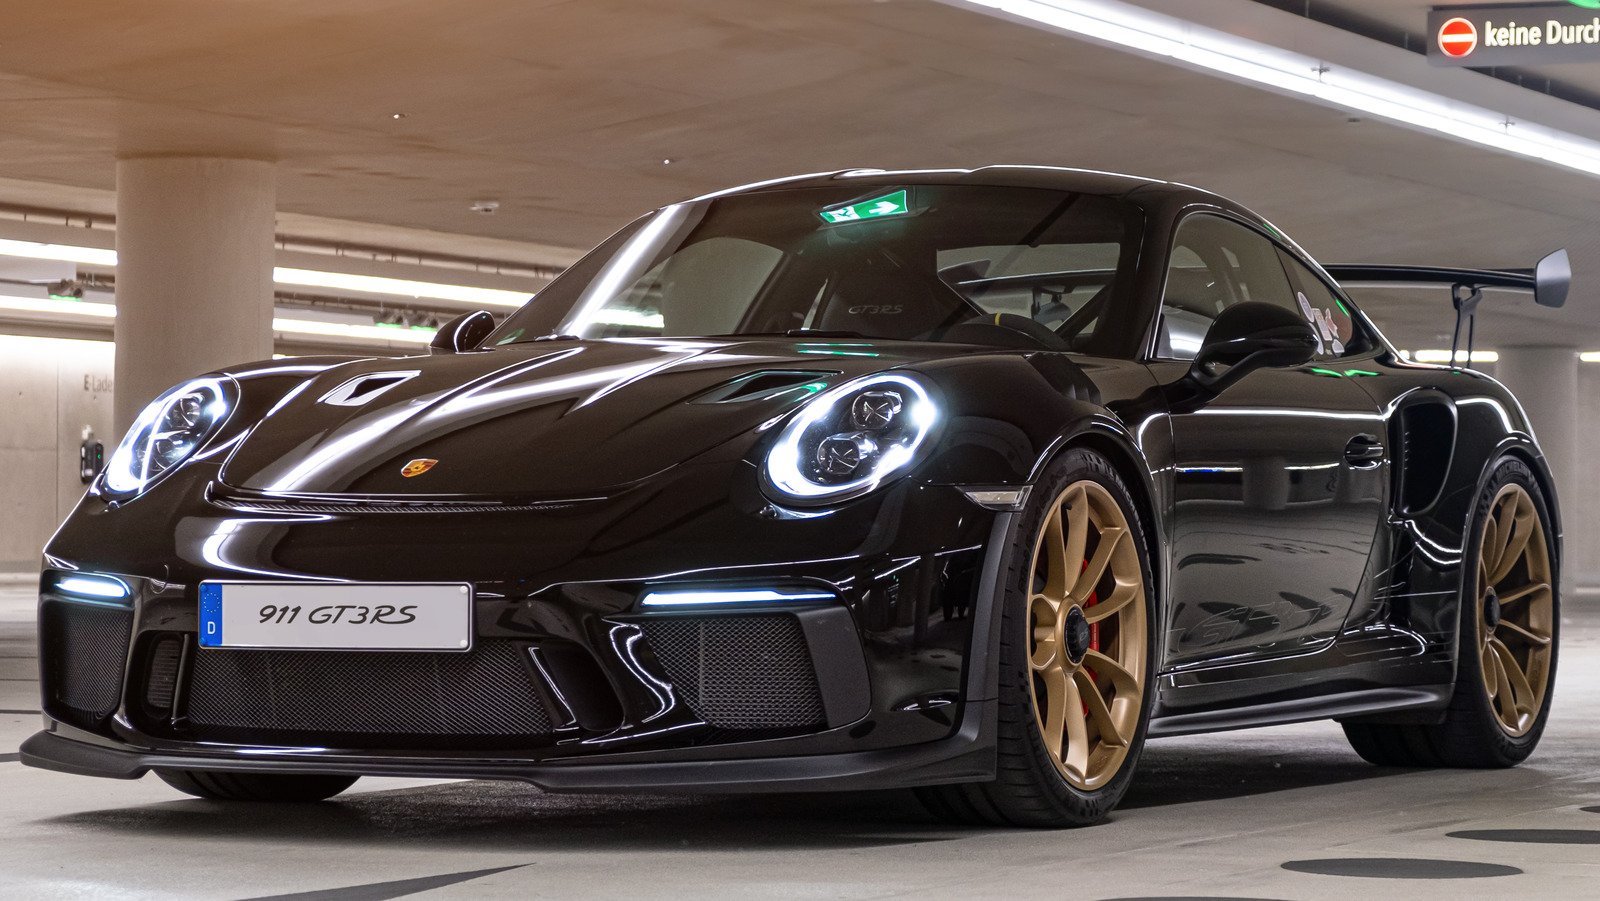 World's Blackest Paint Meets A Porsche 911 And The Results Are Wild